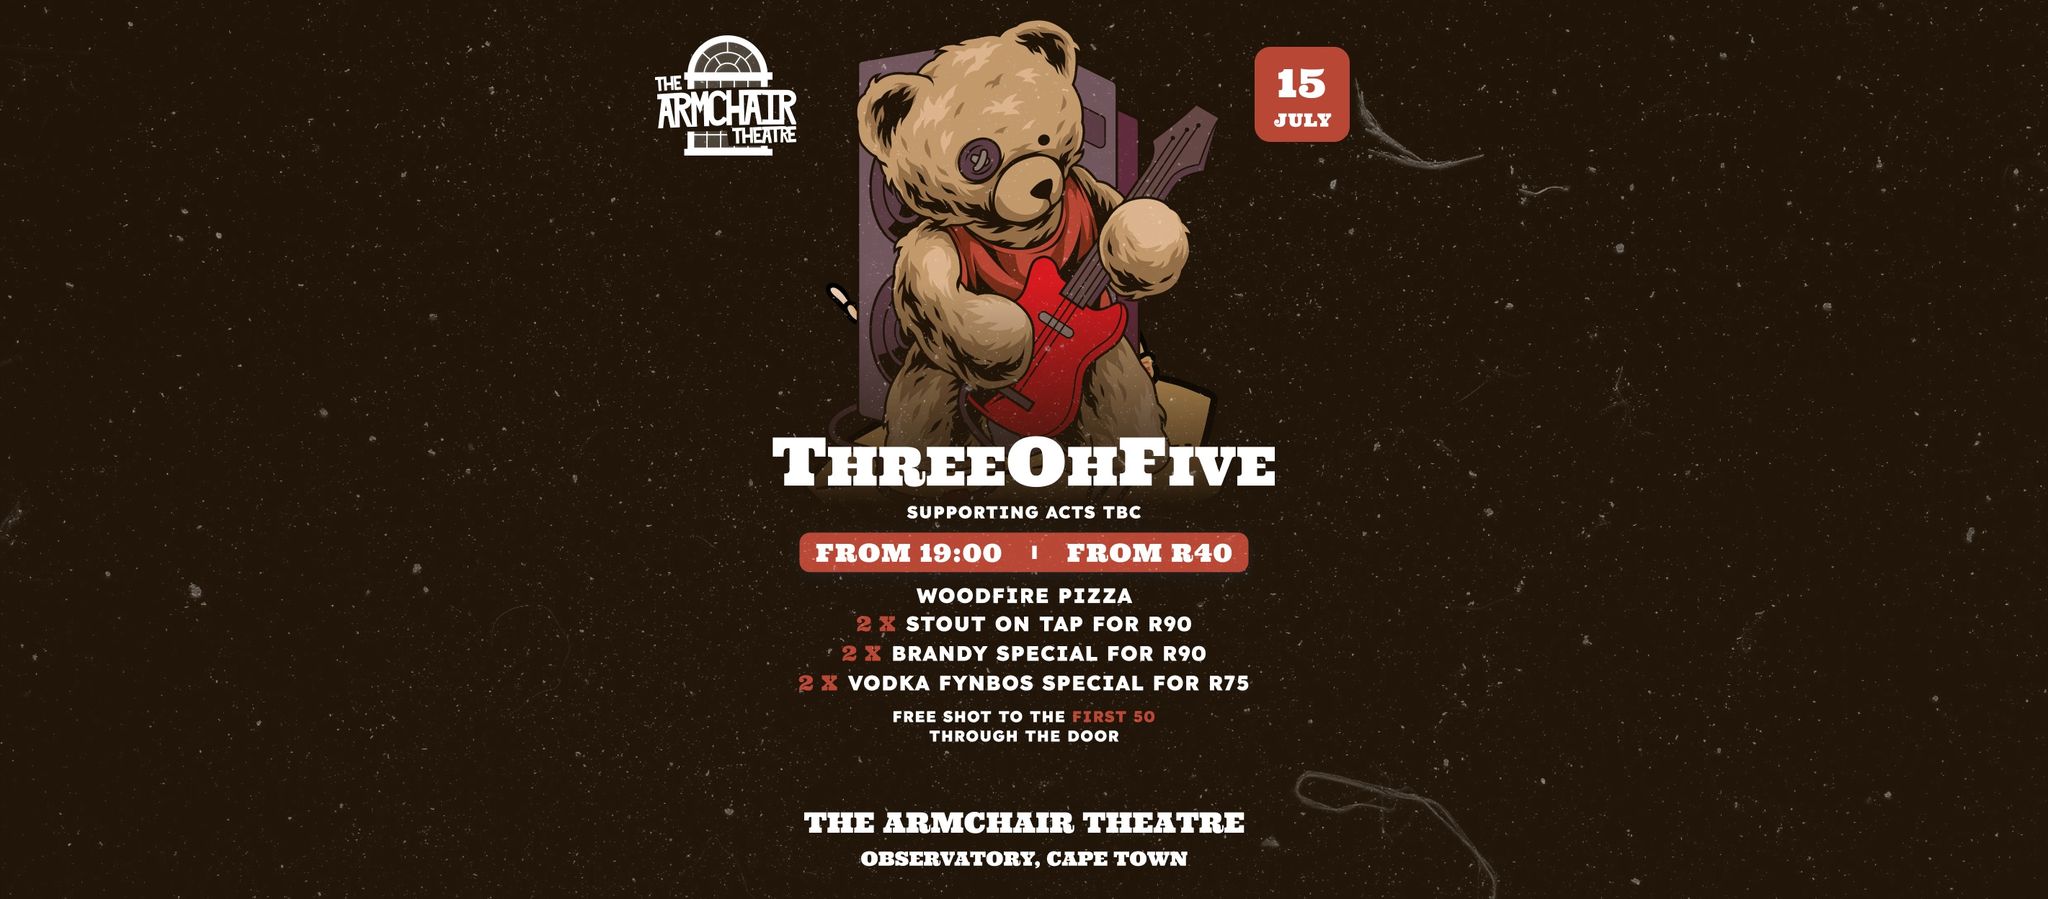 
ThreeOhFive LIVE At The Armchair Theatre: A Night of Unforgettable Music

Join us for an incredible live performance by ThreeOhFive at The Armchair Theatre. Get ready to be blown away by their captivating music and dynamic stage presence.

Event Details:
Date: Saturday, July 15
Time: 20:00 - 23:00
Venue: The Armchair Theatre, 135 Lower Main Rd, Observatory, Cape Town, 7925

Ticket Information:
Secure your spot for this extraordinary musical experience. Tickets are available and can be purchased online for your convenience. Payments are secure and encrypted, ensuring a hassle-free transaction.

Directions:
Finding your way to The Armchair Theatre is easy:
Address: 135 Lower Main Rd, Observatory, Cape Town, 7925.
Use the provided directions or your preferred navigation app to reach the venue without any hassle.

Prepare yourself for a night filled with incredible music and unforgettable moments. ThreeOhFive is ready to deliver an exceptional performance that will leave you wanting more. Get your tickets now and be a part of this extraordinary event.